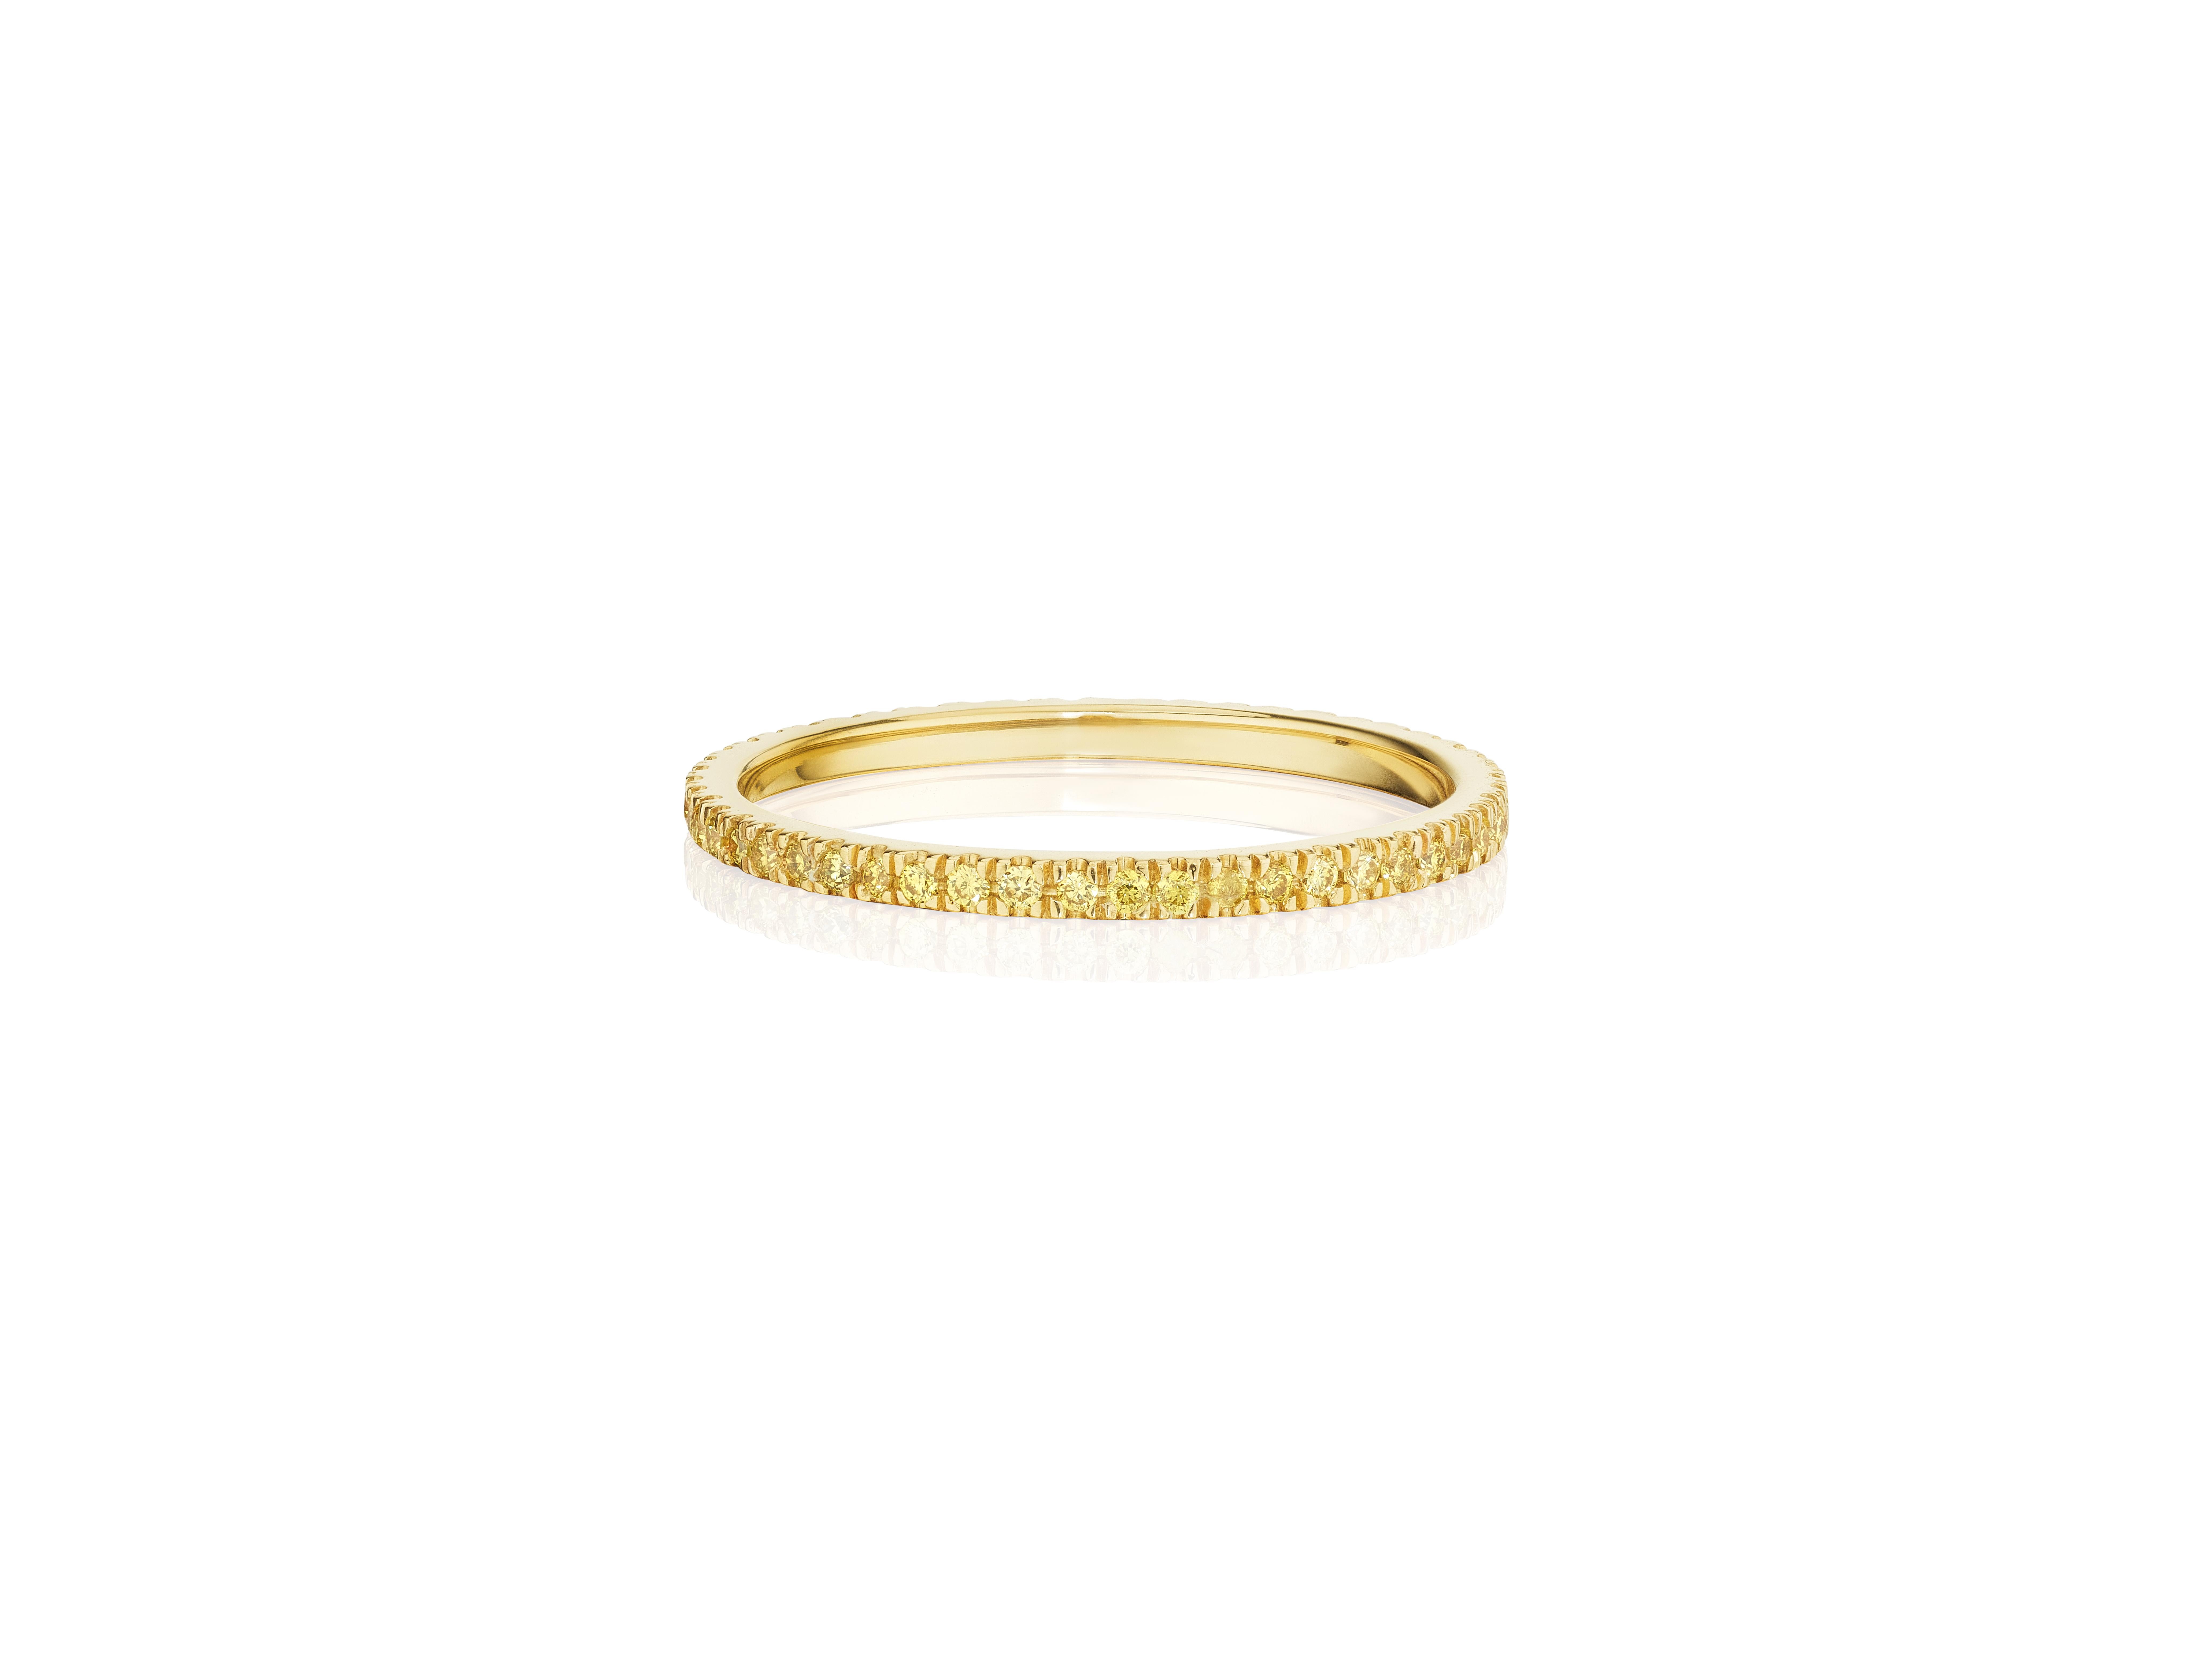 For Sale:  Single Row Fancy Intense Yellow Eternity Band Stackable Ring Set in 18K Gold 2